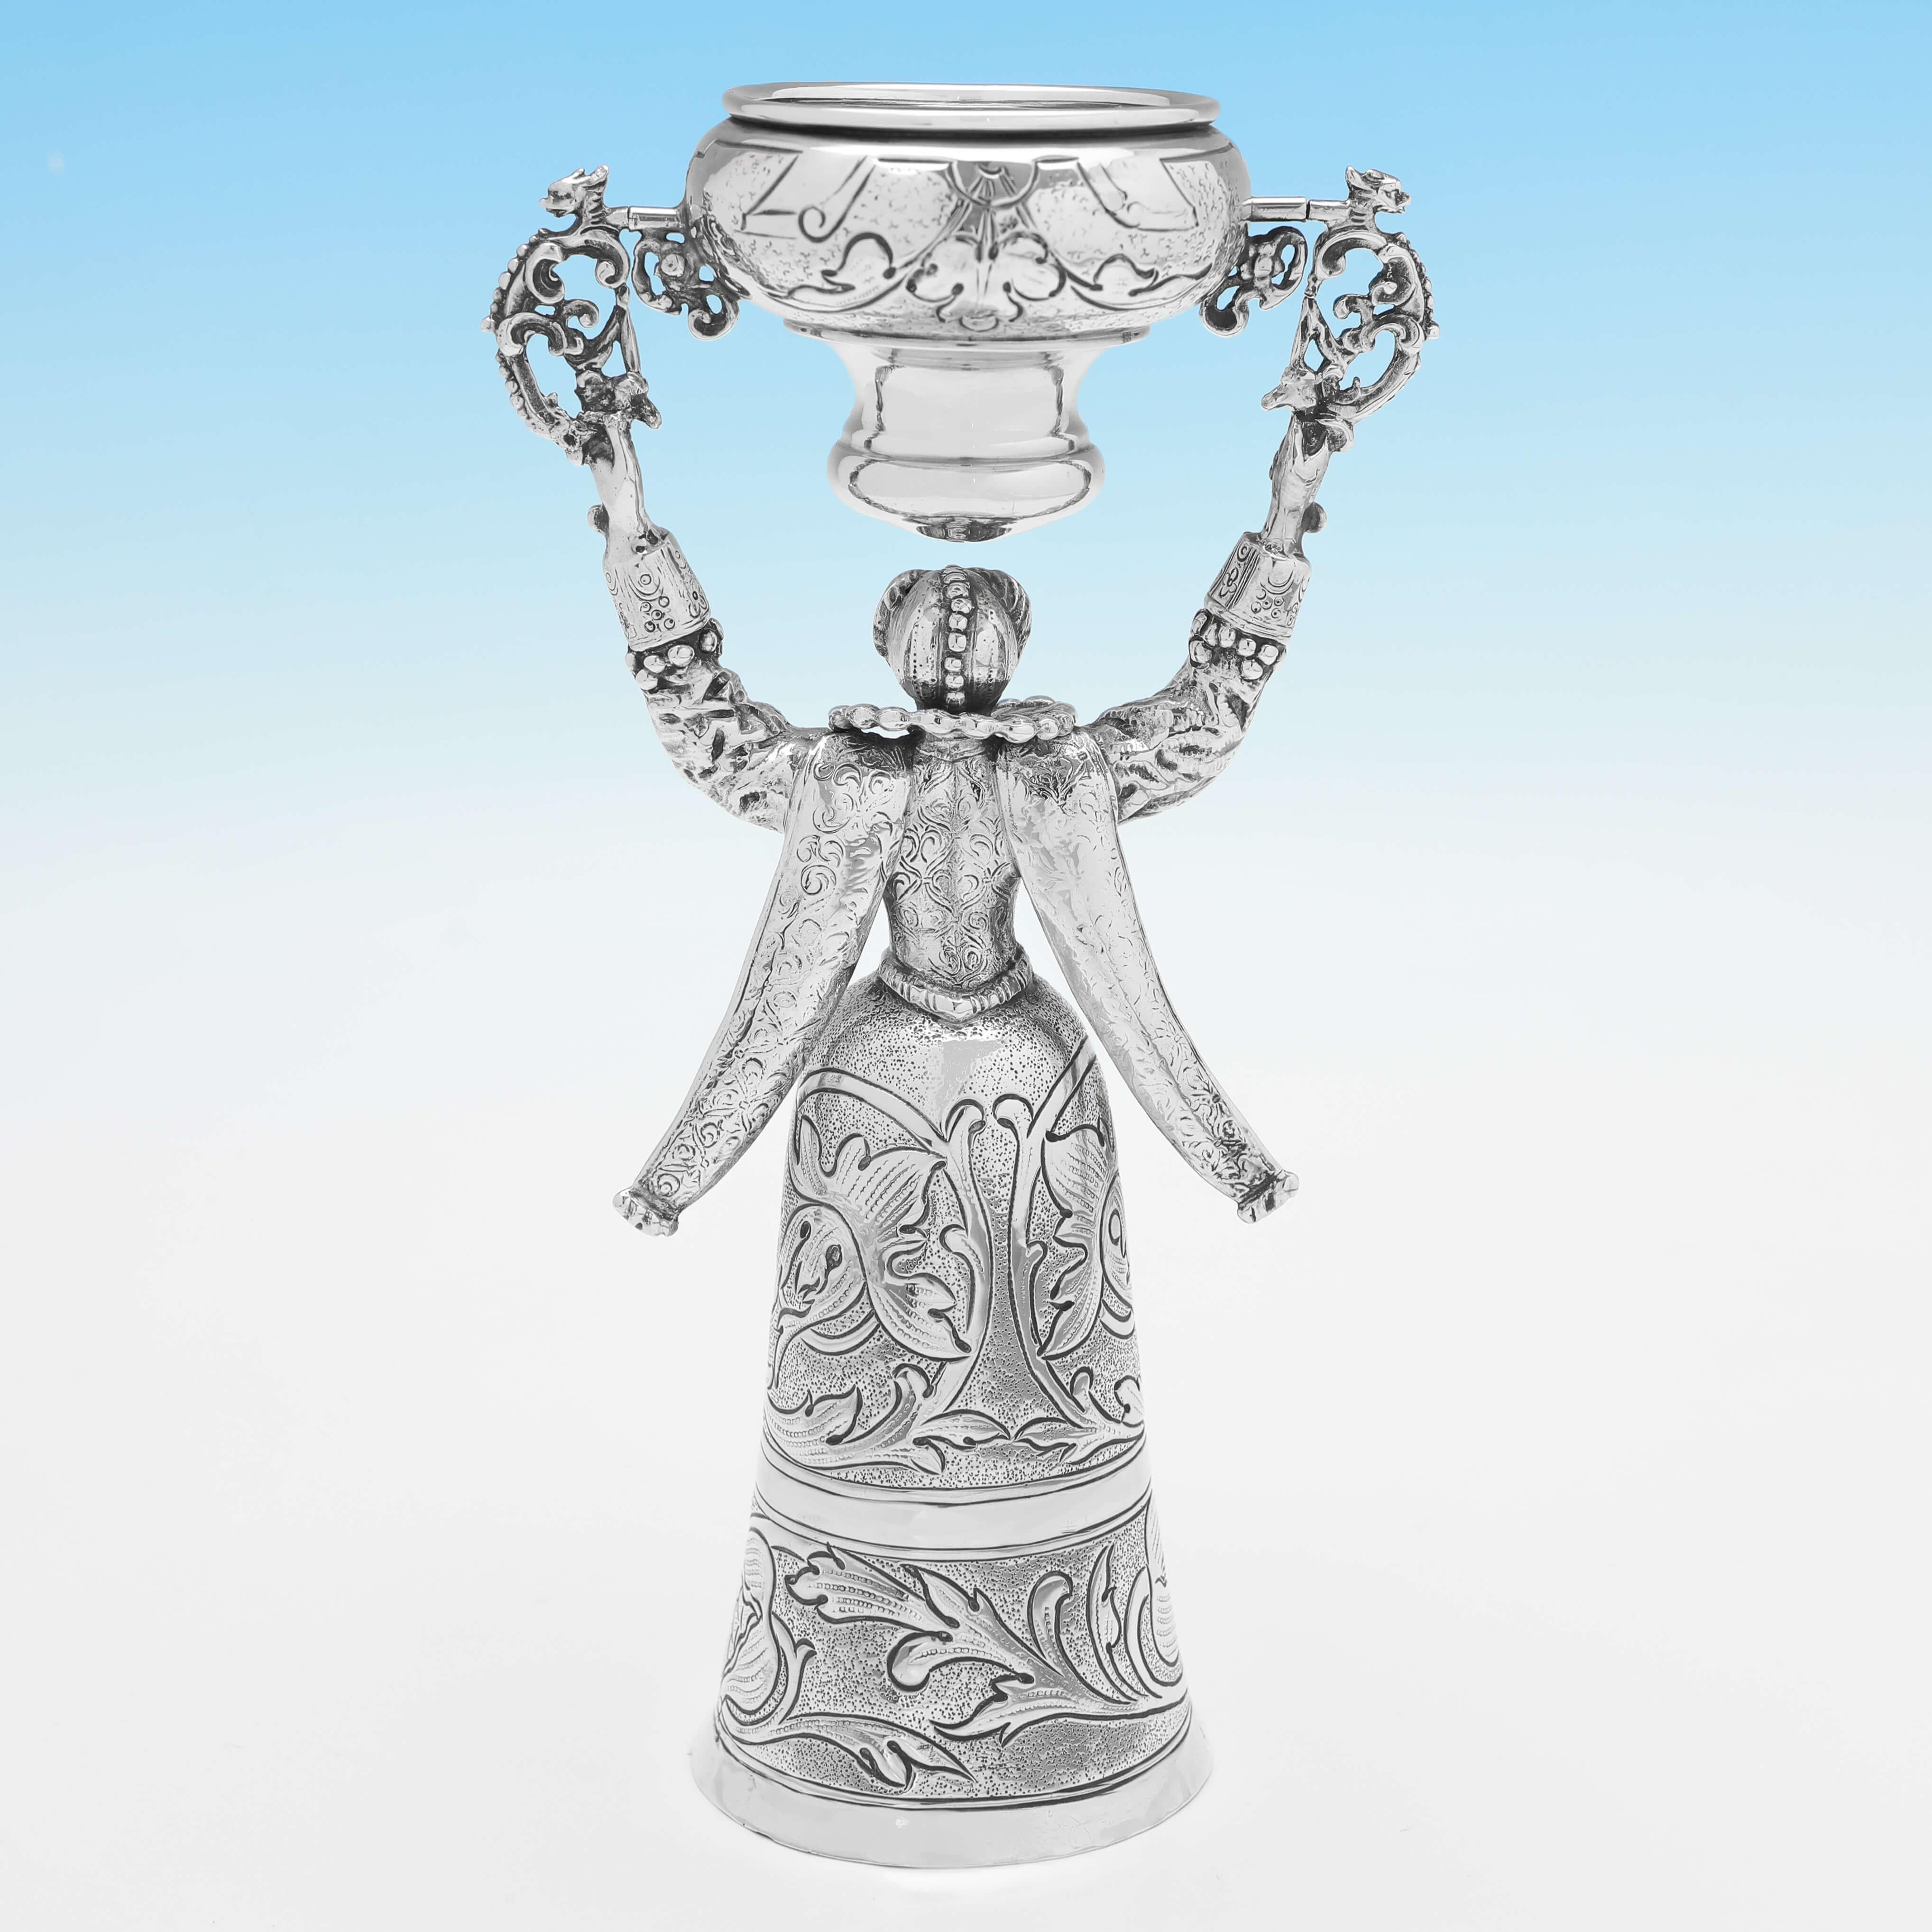 Carrying import marks for Chester in 1900 by Berthold Muller, this charming, Victorian,antique sterling silver wager cup, is modelled as a lady in costume, and features chased decoration throughout. 

The wager cup measures 8.25